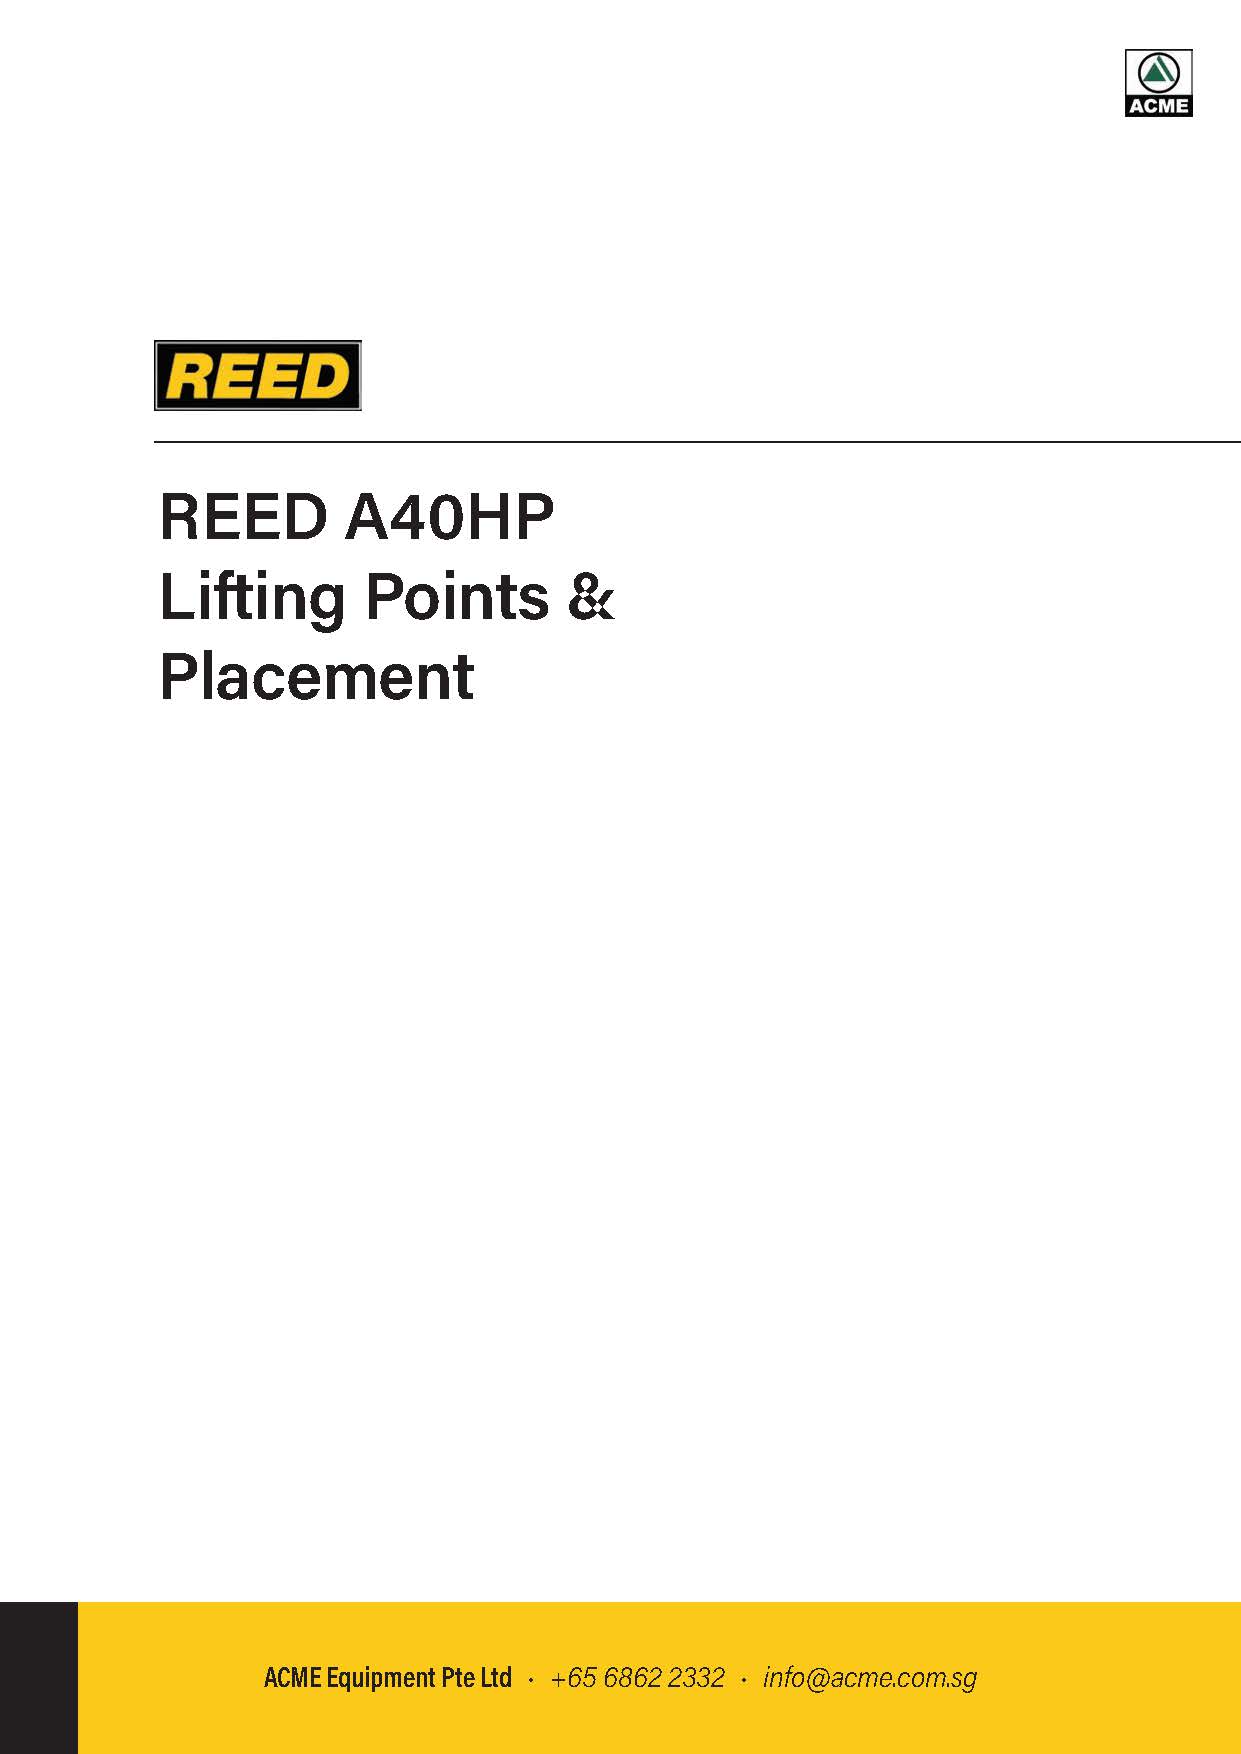 REED A Series Lifting Point Guide